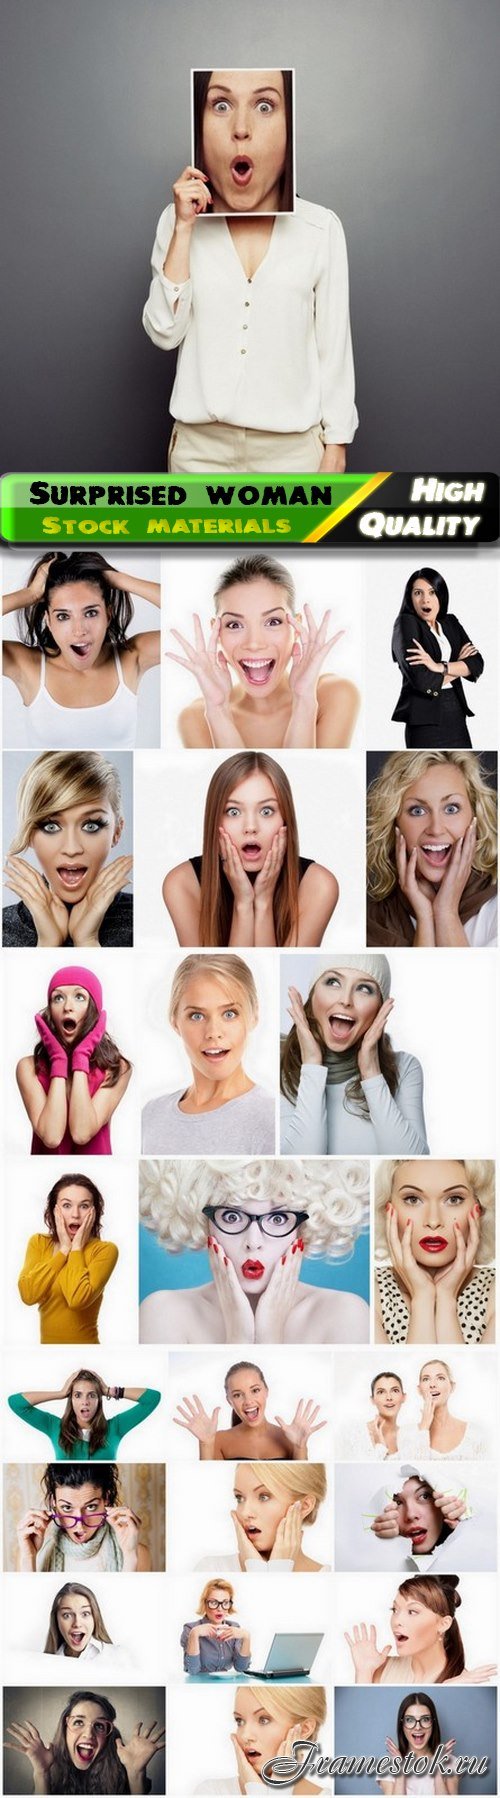 Surprised woman and girl with an open mouth  - 25 HQ Jpg